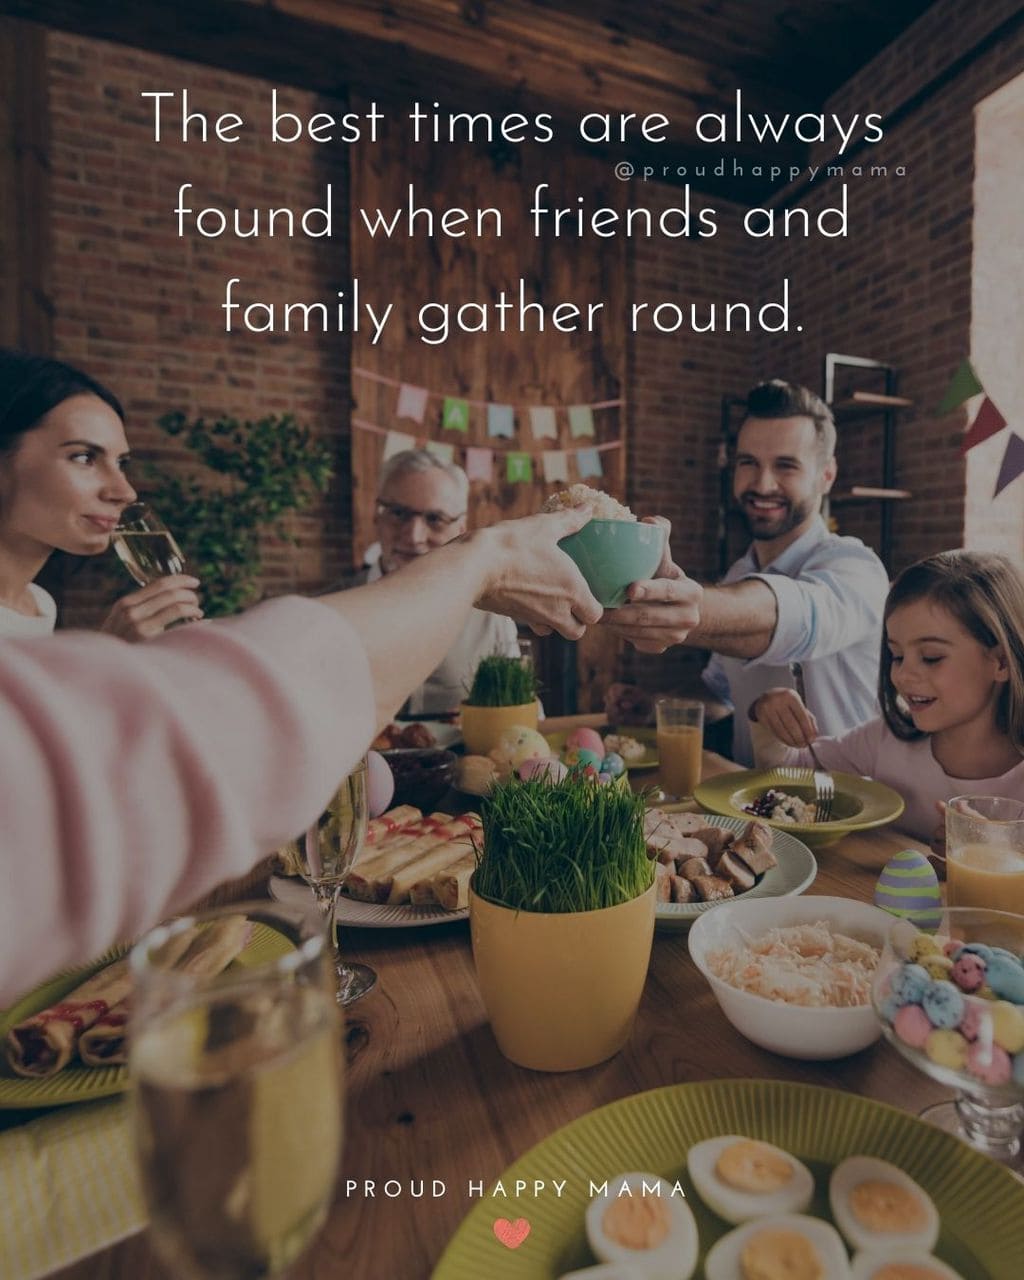 Quotes Bout Family | The best times are always found when friends and family gather round.